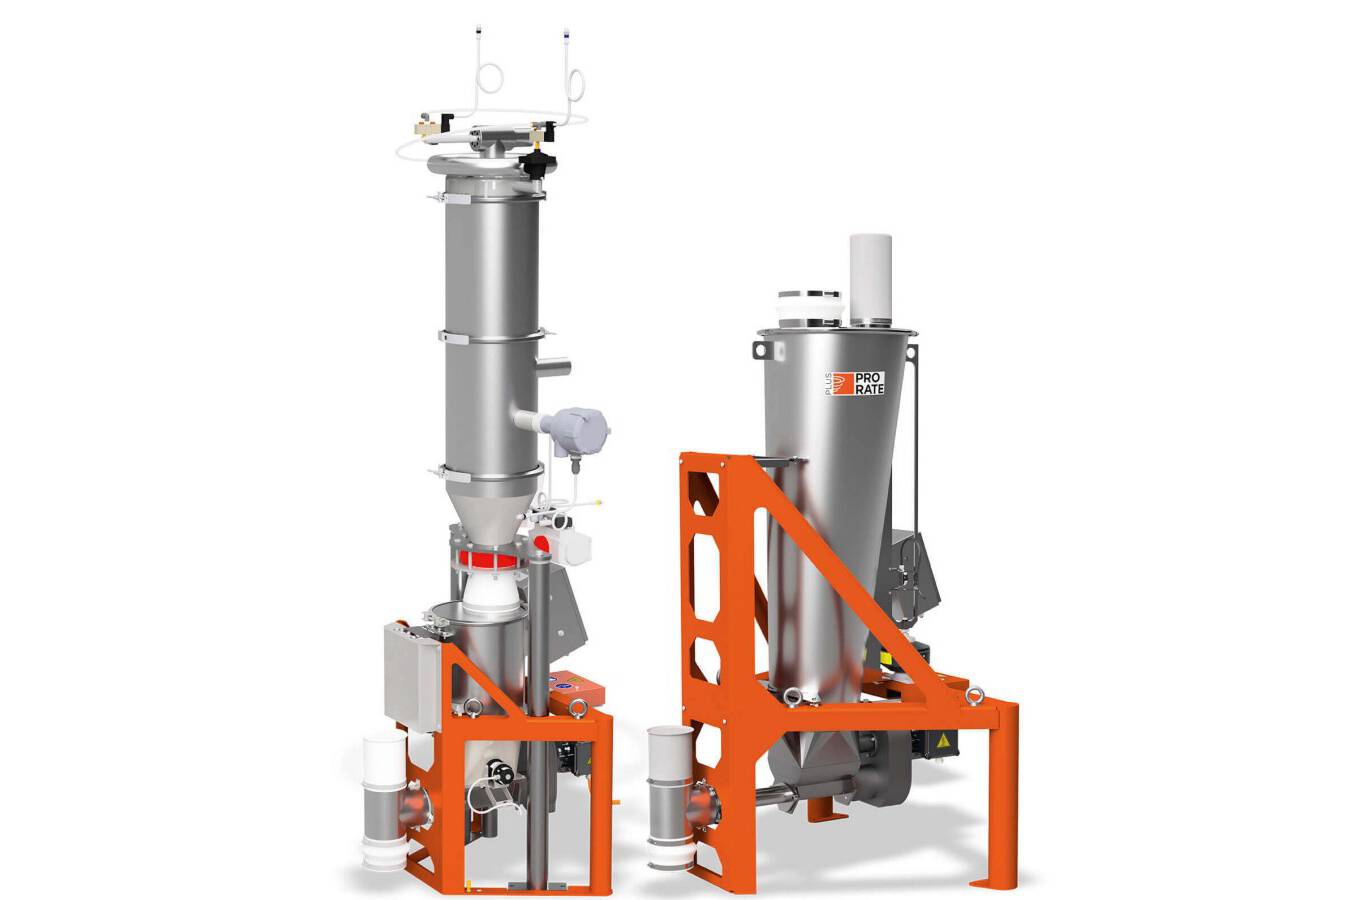 The gravimetric ProRate PLUS single and twin screw feeders are very robustly constructed and stand out with their good price-performance ratio.